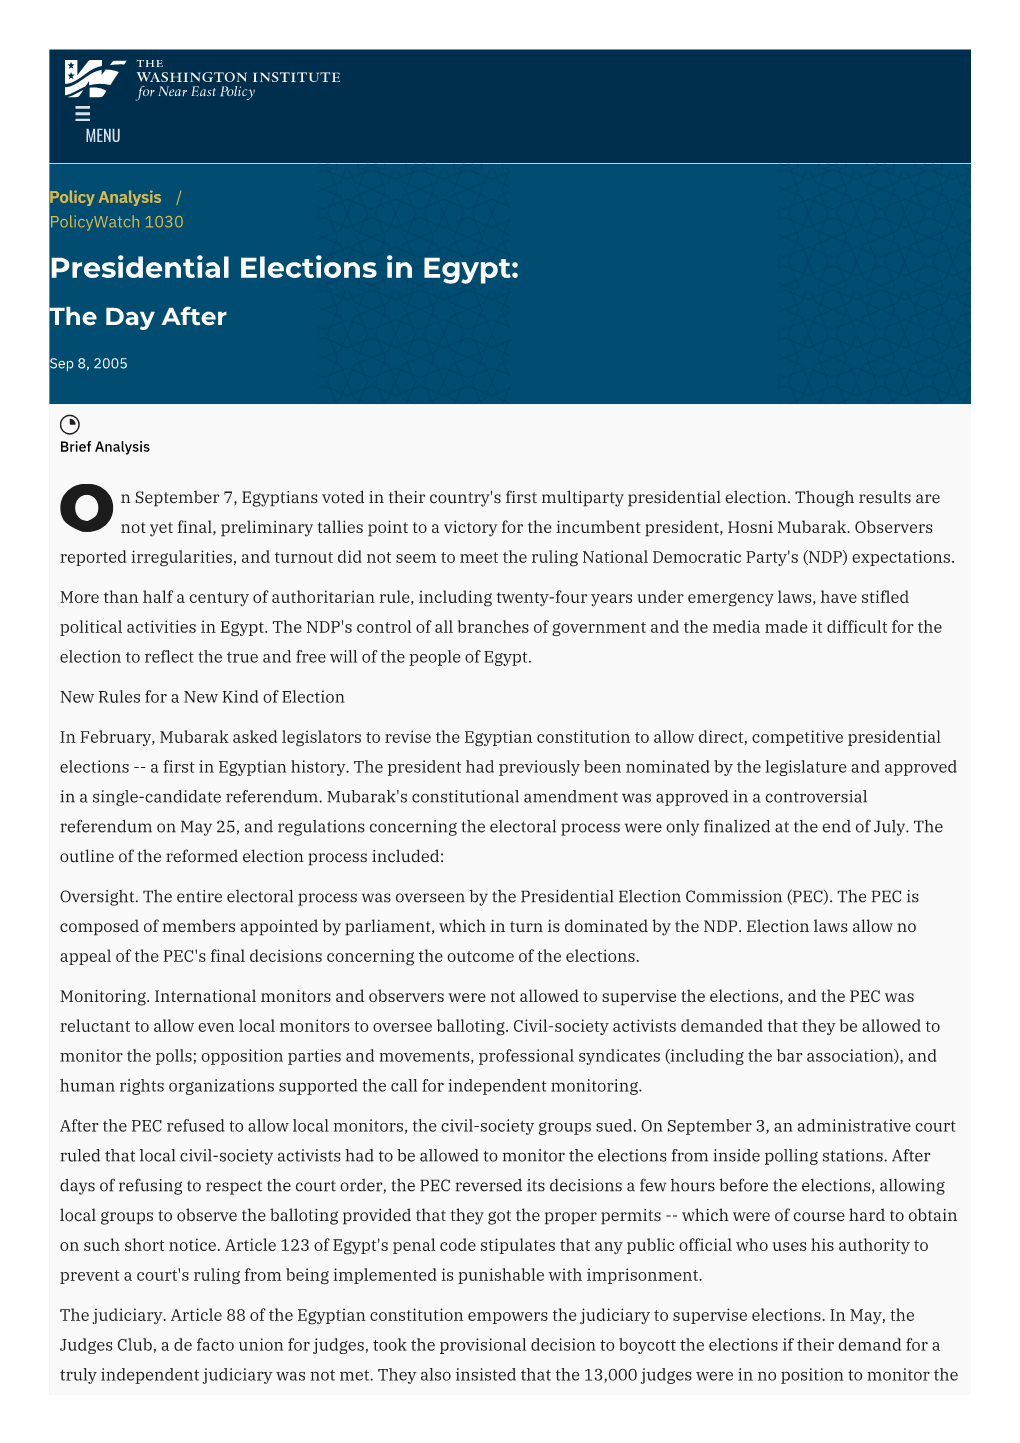 Presidential Elections in Egypt: the Day After | the Washington Institute